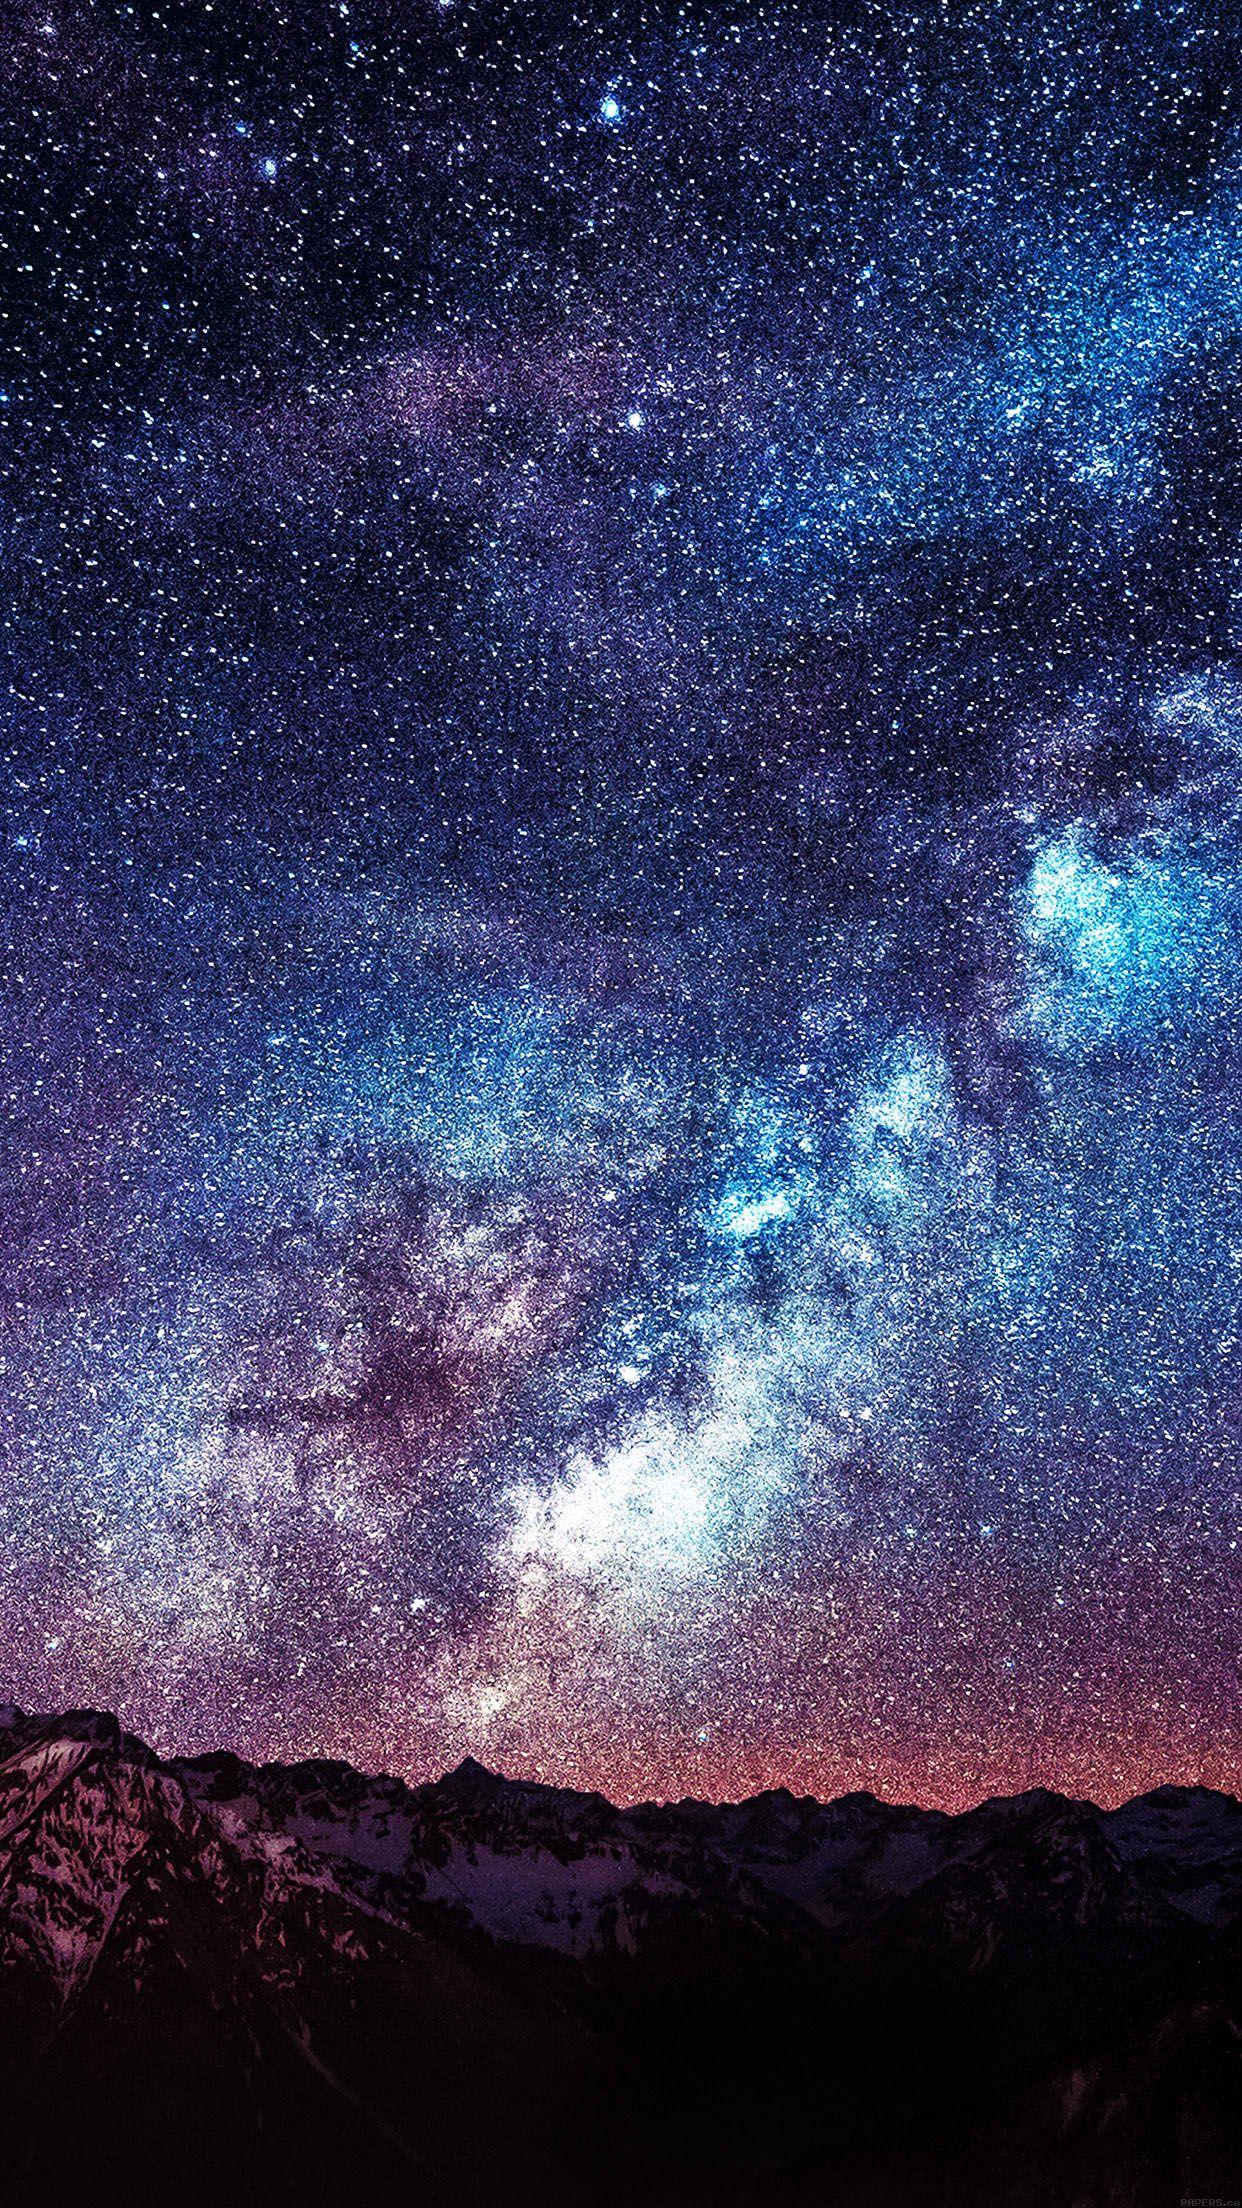 Milkyway Outer Space / Find More Galactic HD Space